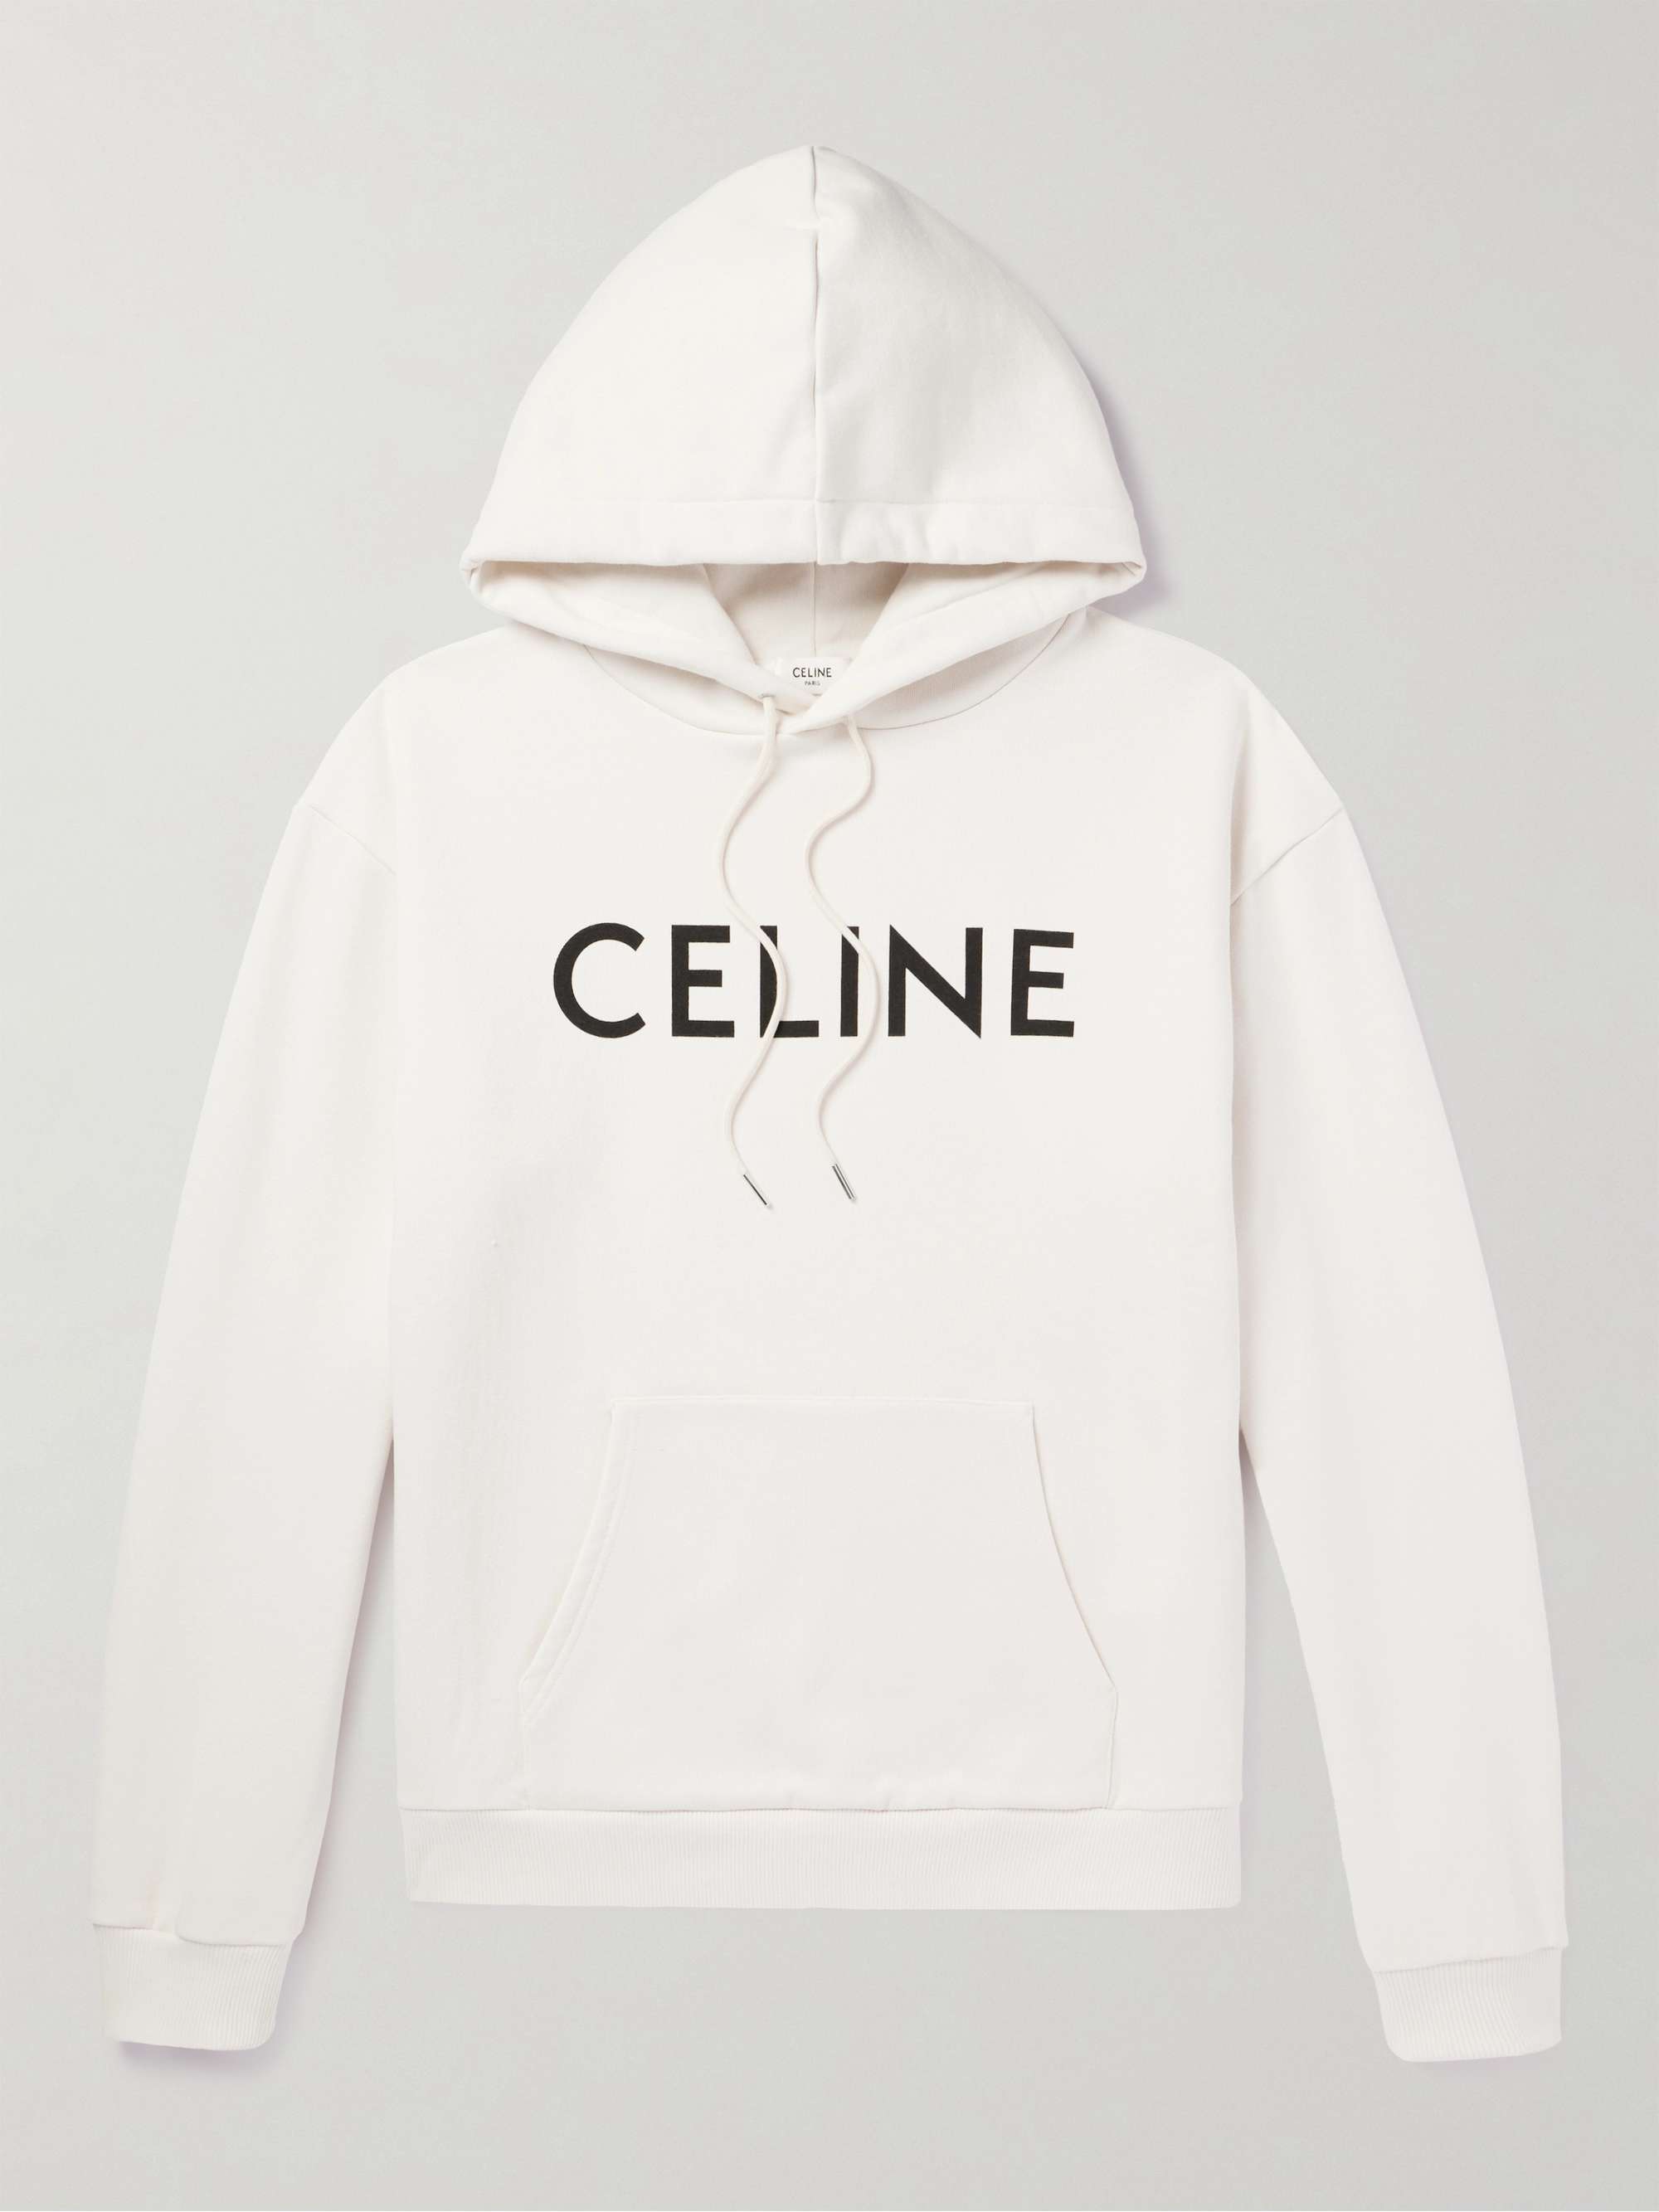 Celine Hoodie, Latest Celine Clothing Collection